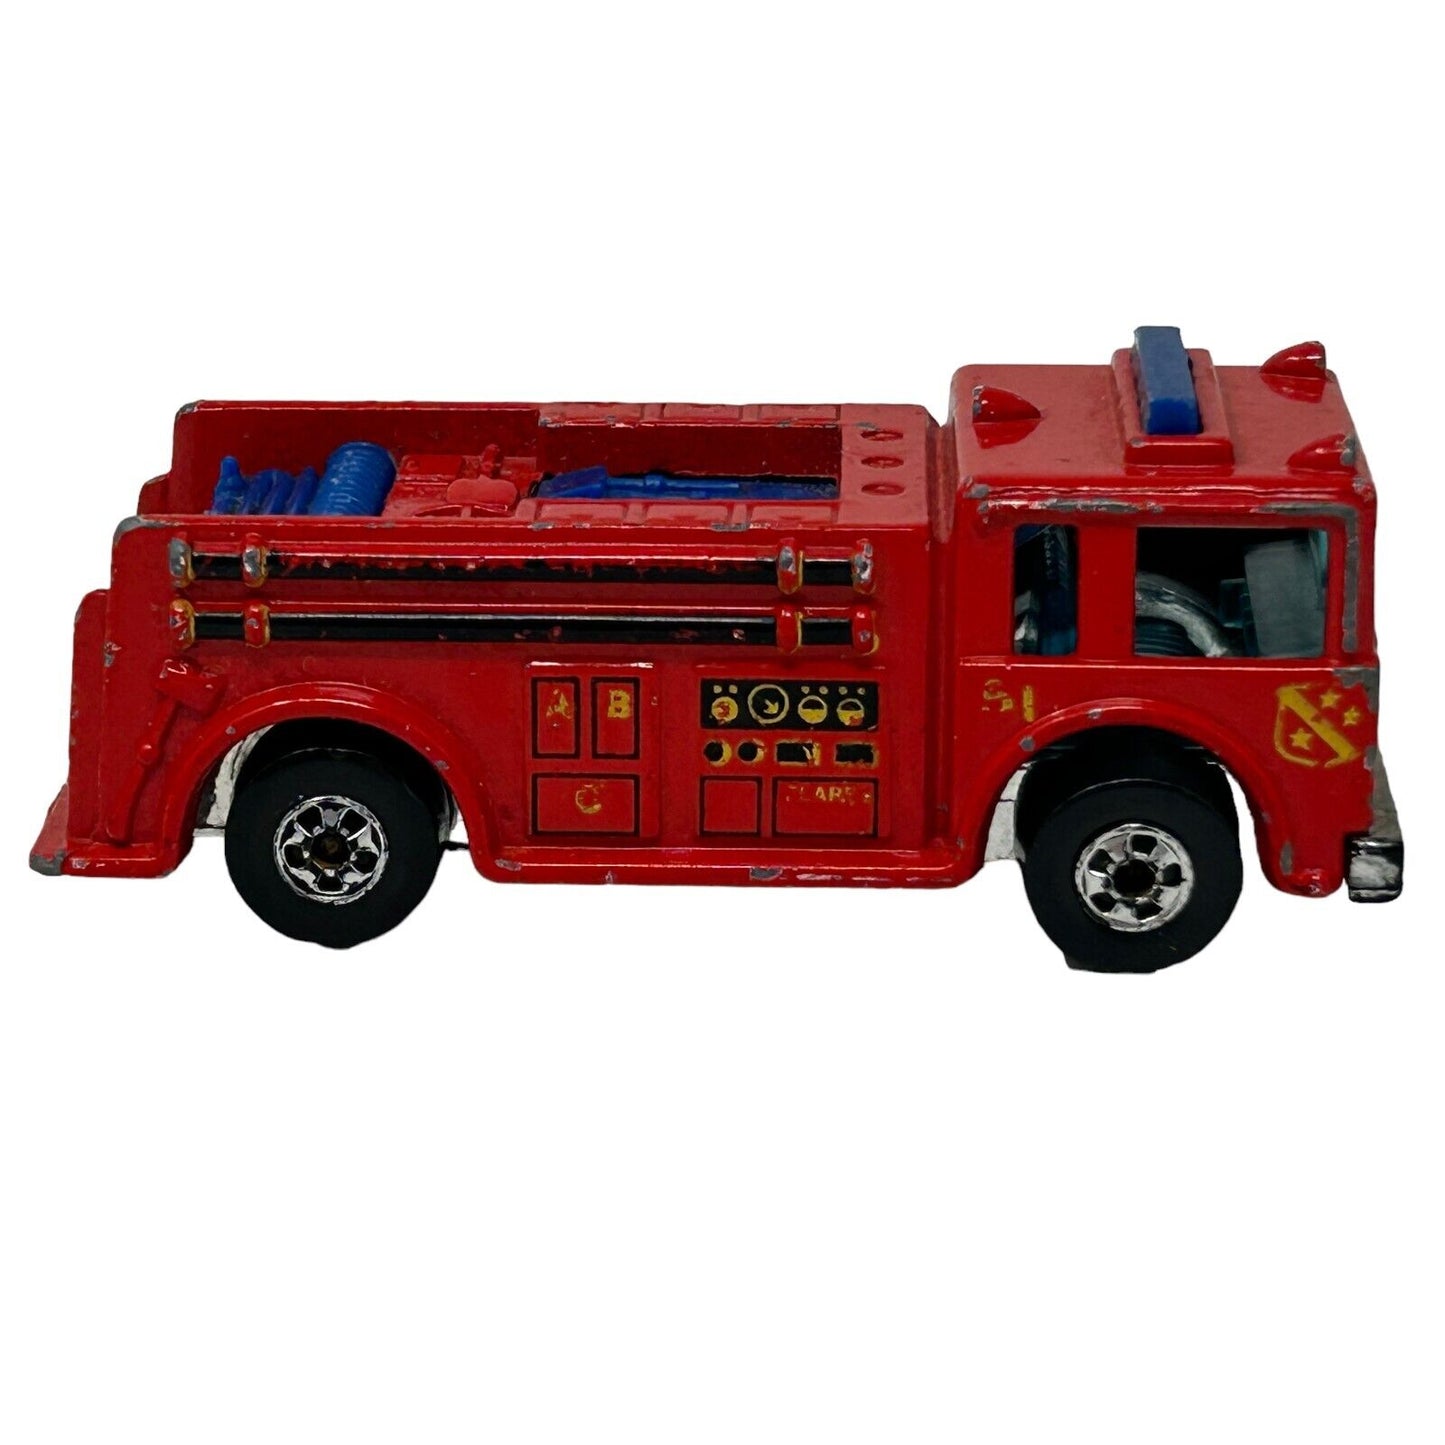 Fire-Eater Fire Engine Hot Wheels Diecast Toy Car Fire Truck Vintage 1989 Red